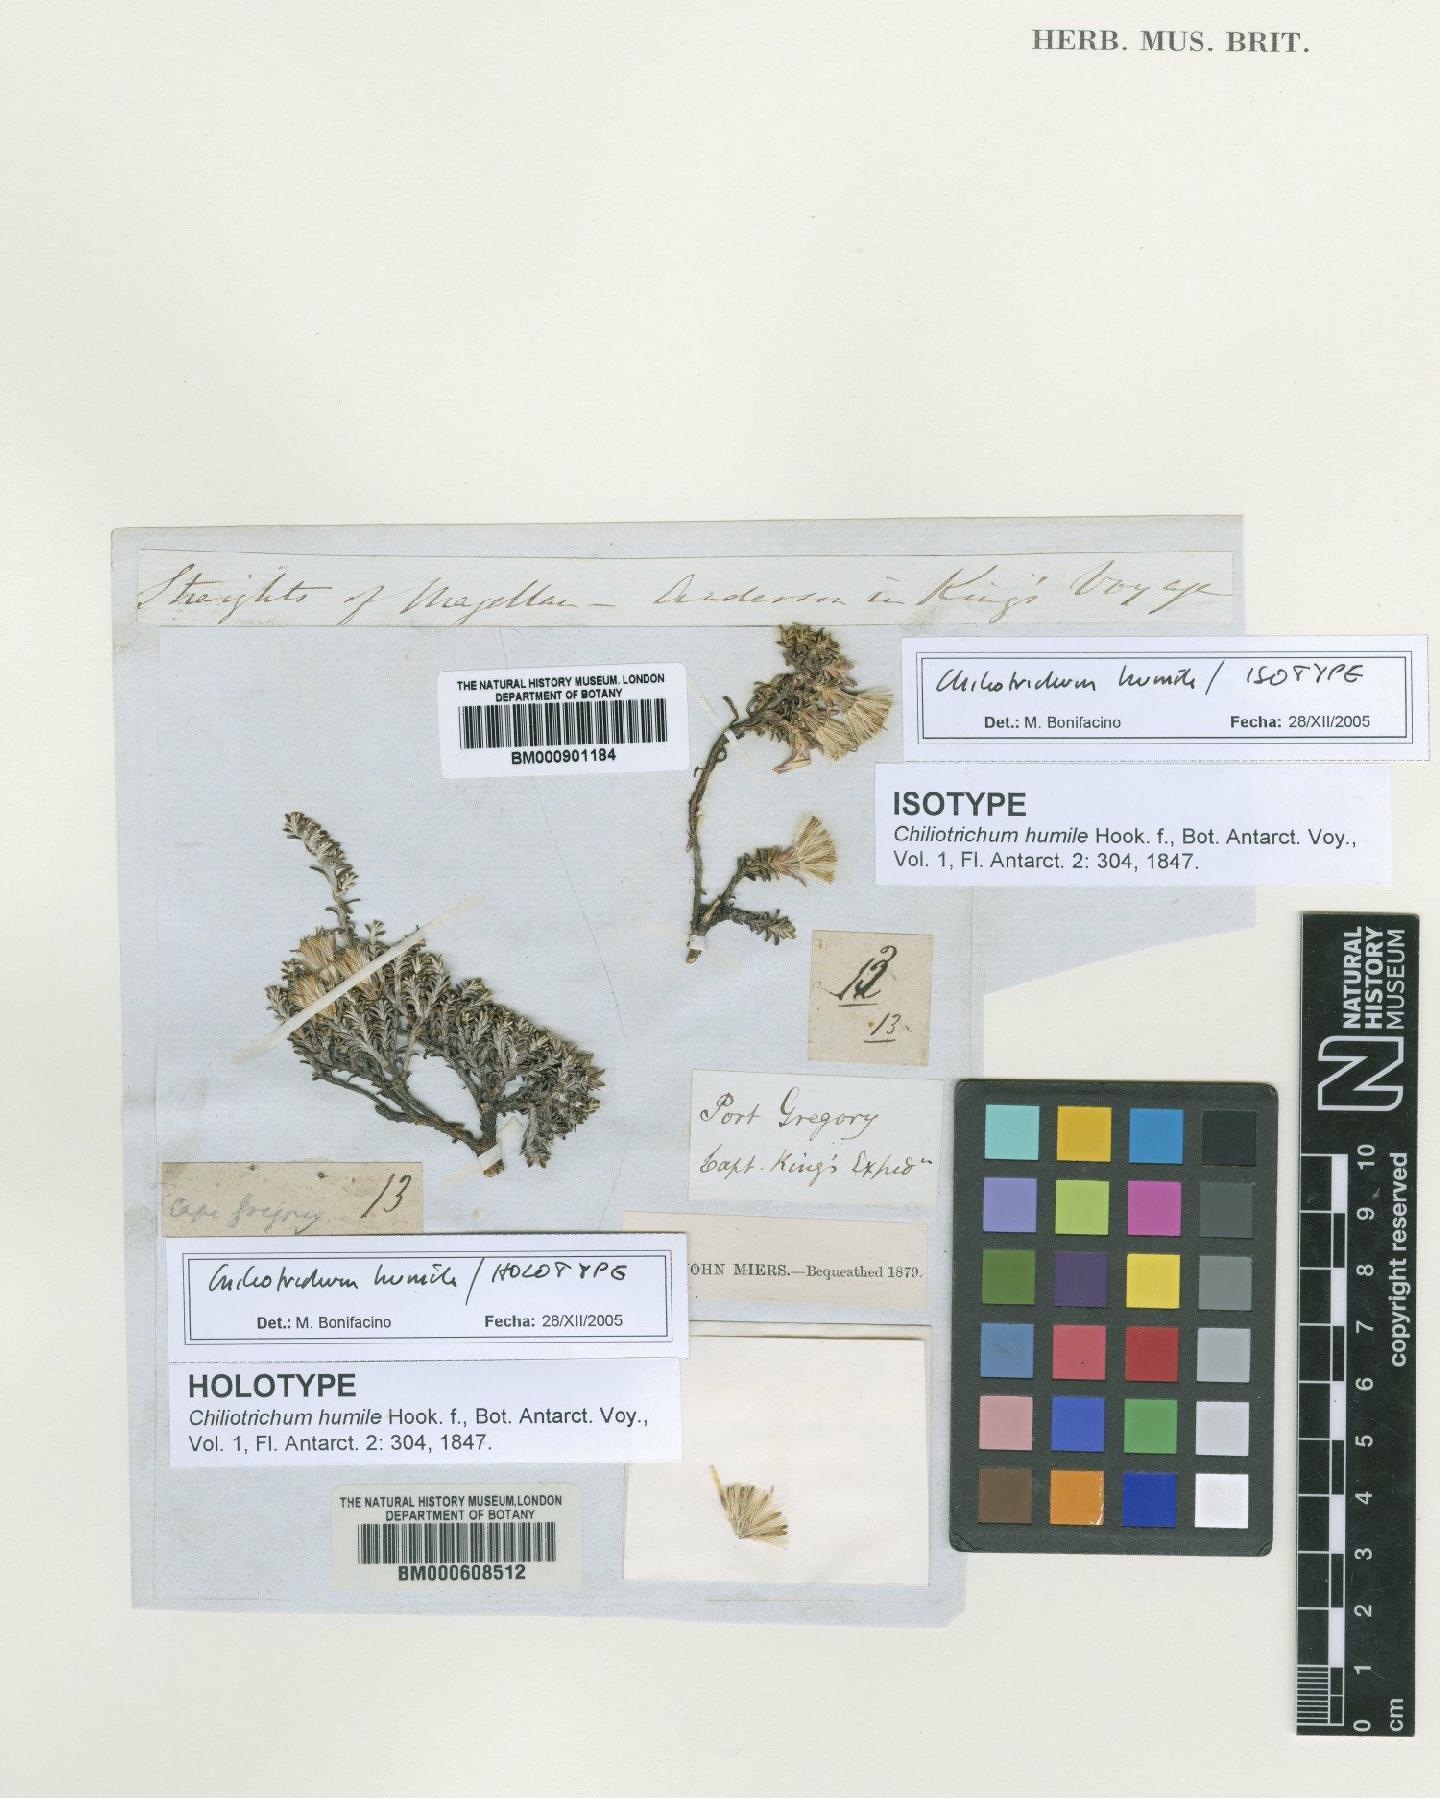 To NHMUK collection (Chiliotrichum humile Hook.f.; Holotype; NHMUK:ecatalogue:4995894)